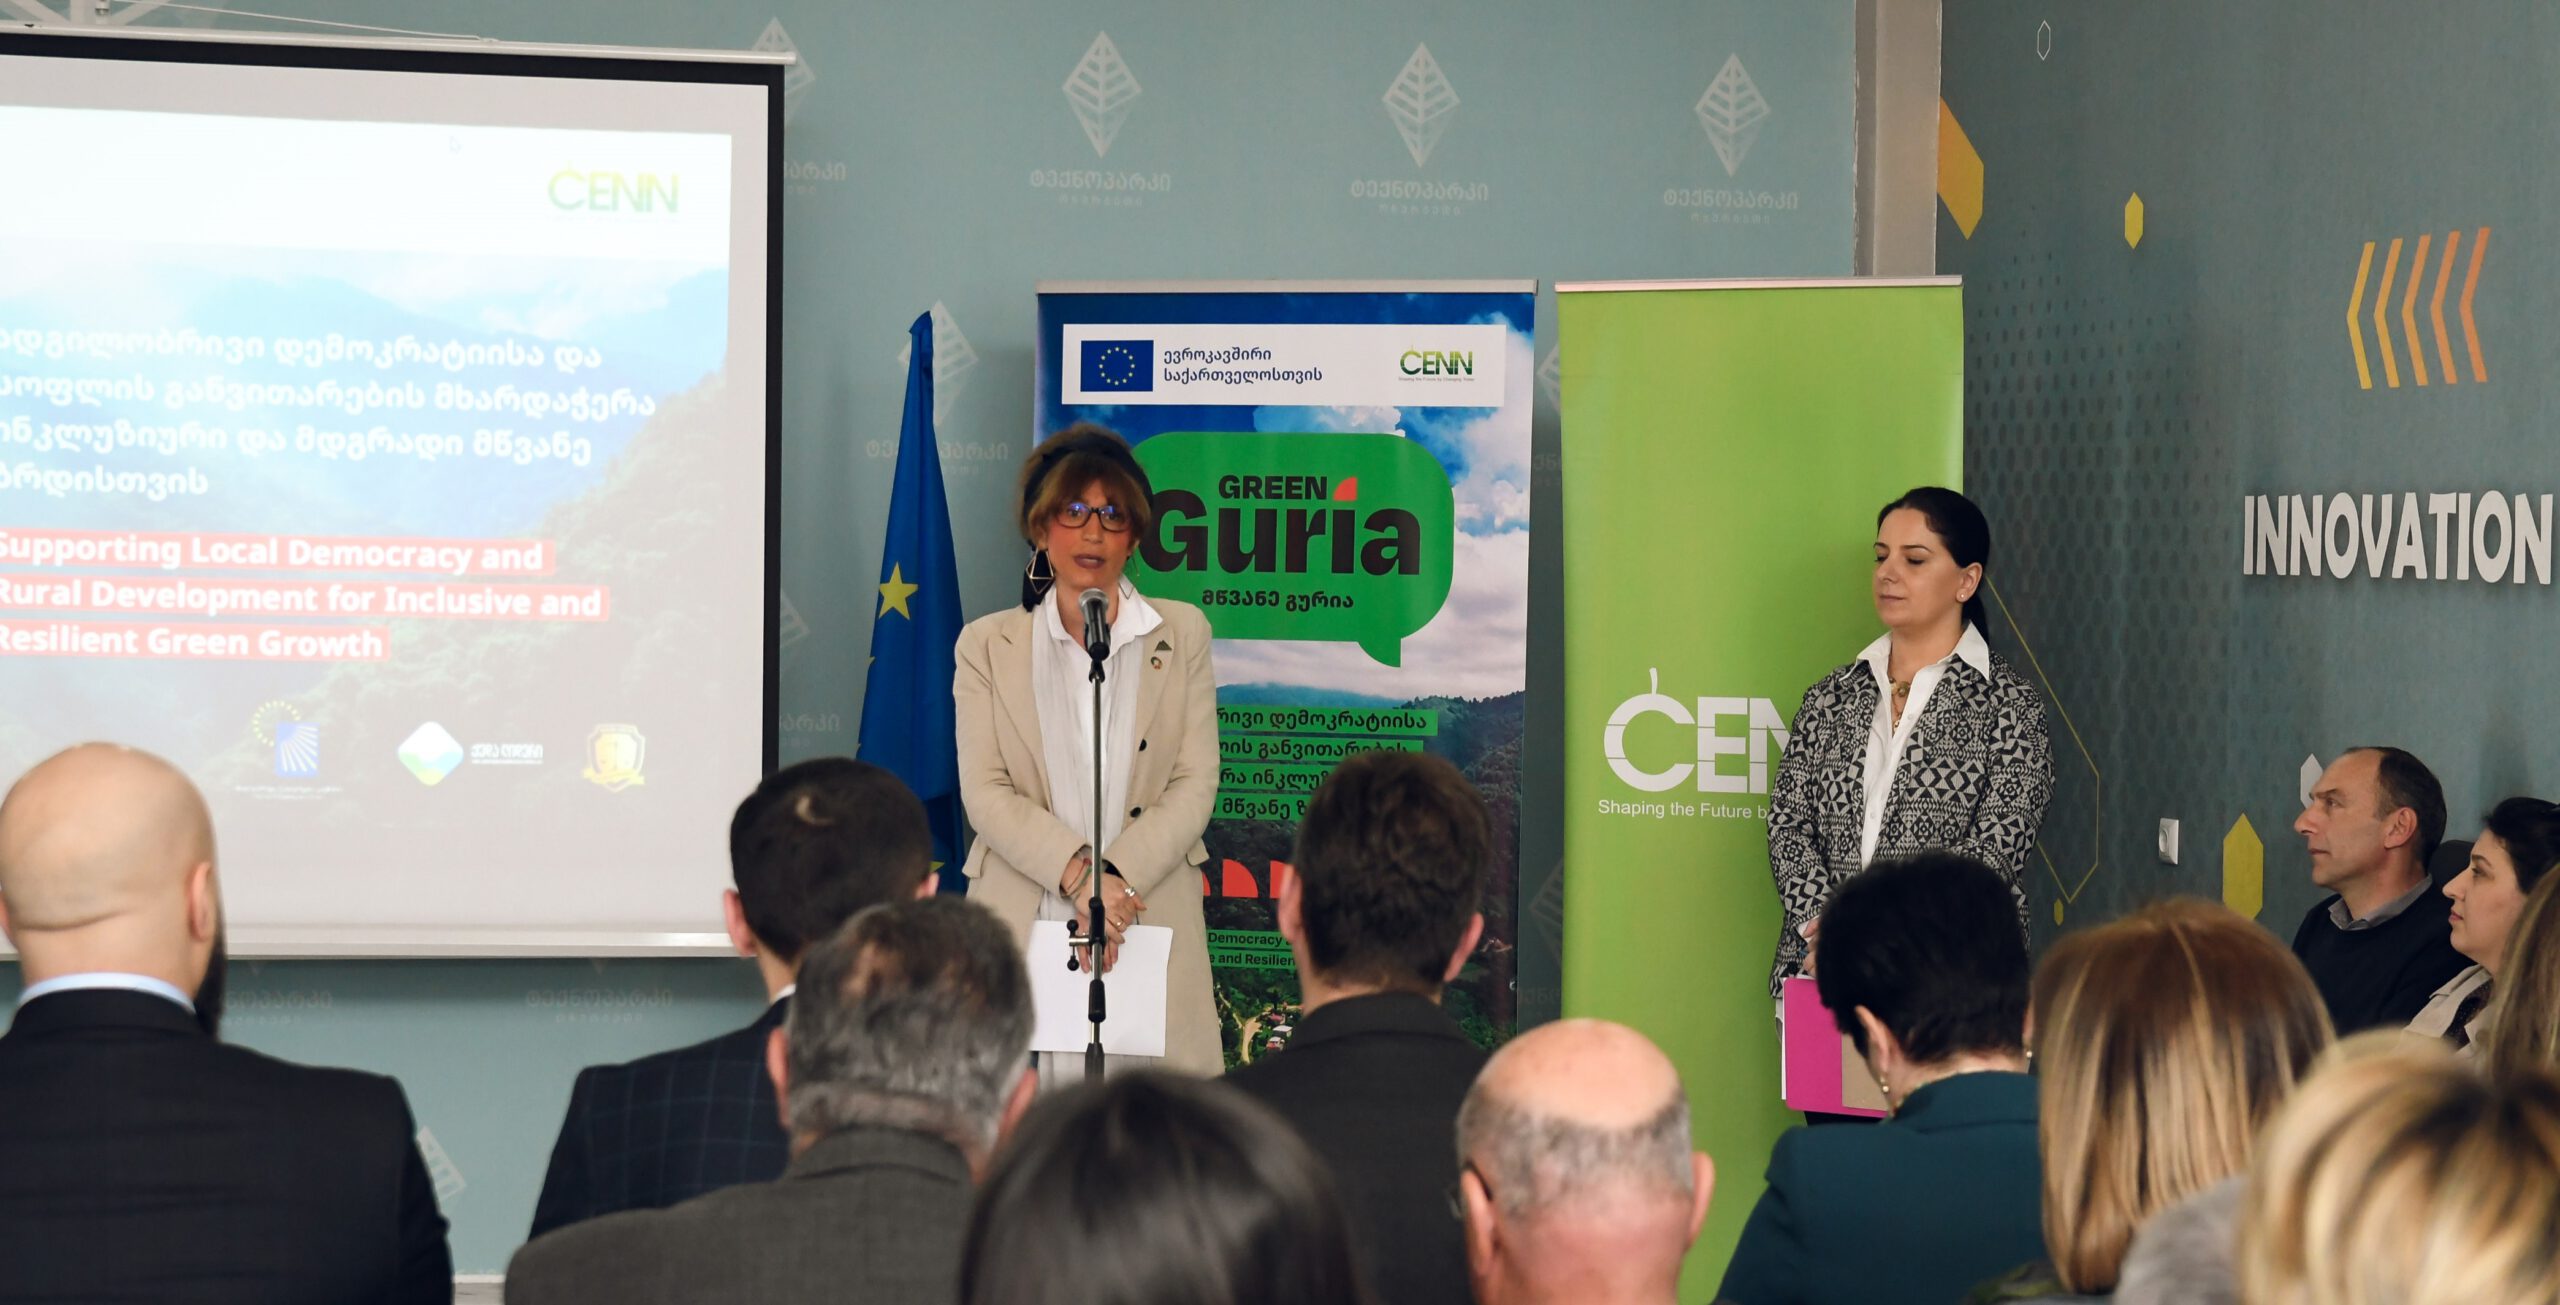 CENN Launched a New EU-funded Rural Development Project in Guria